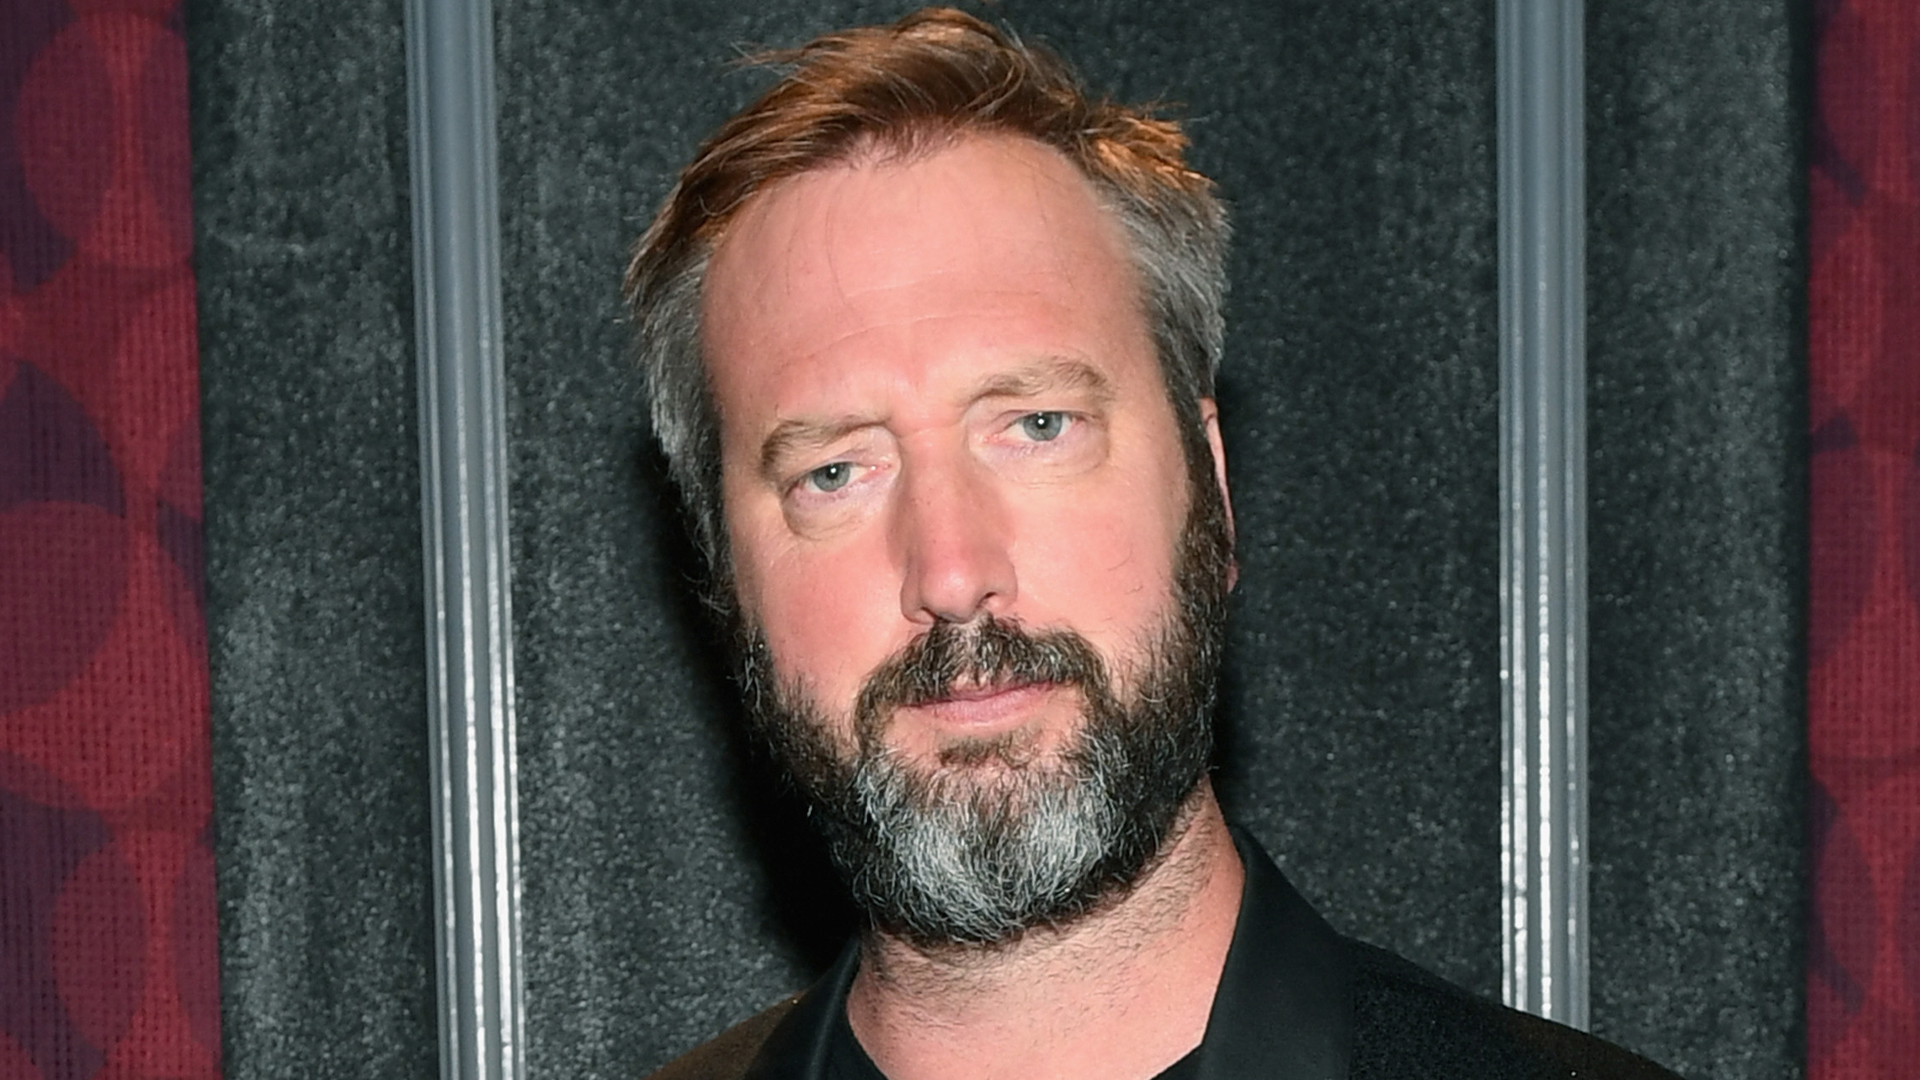 Who is Tom Green and what is he doing now?